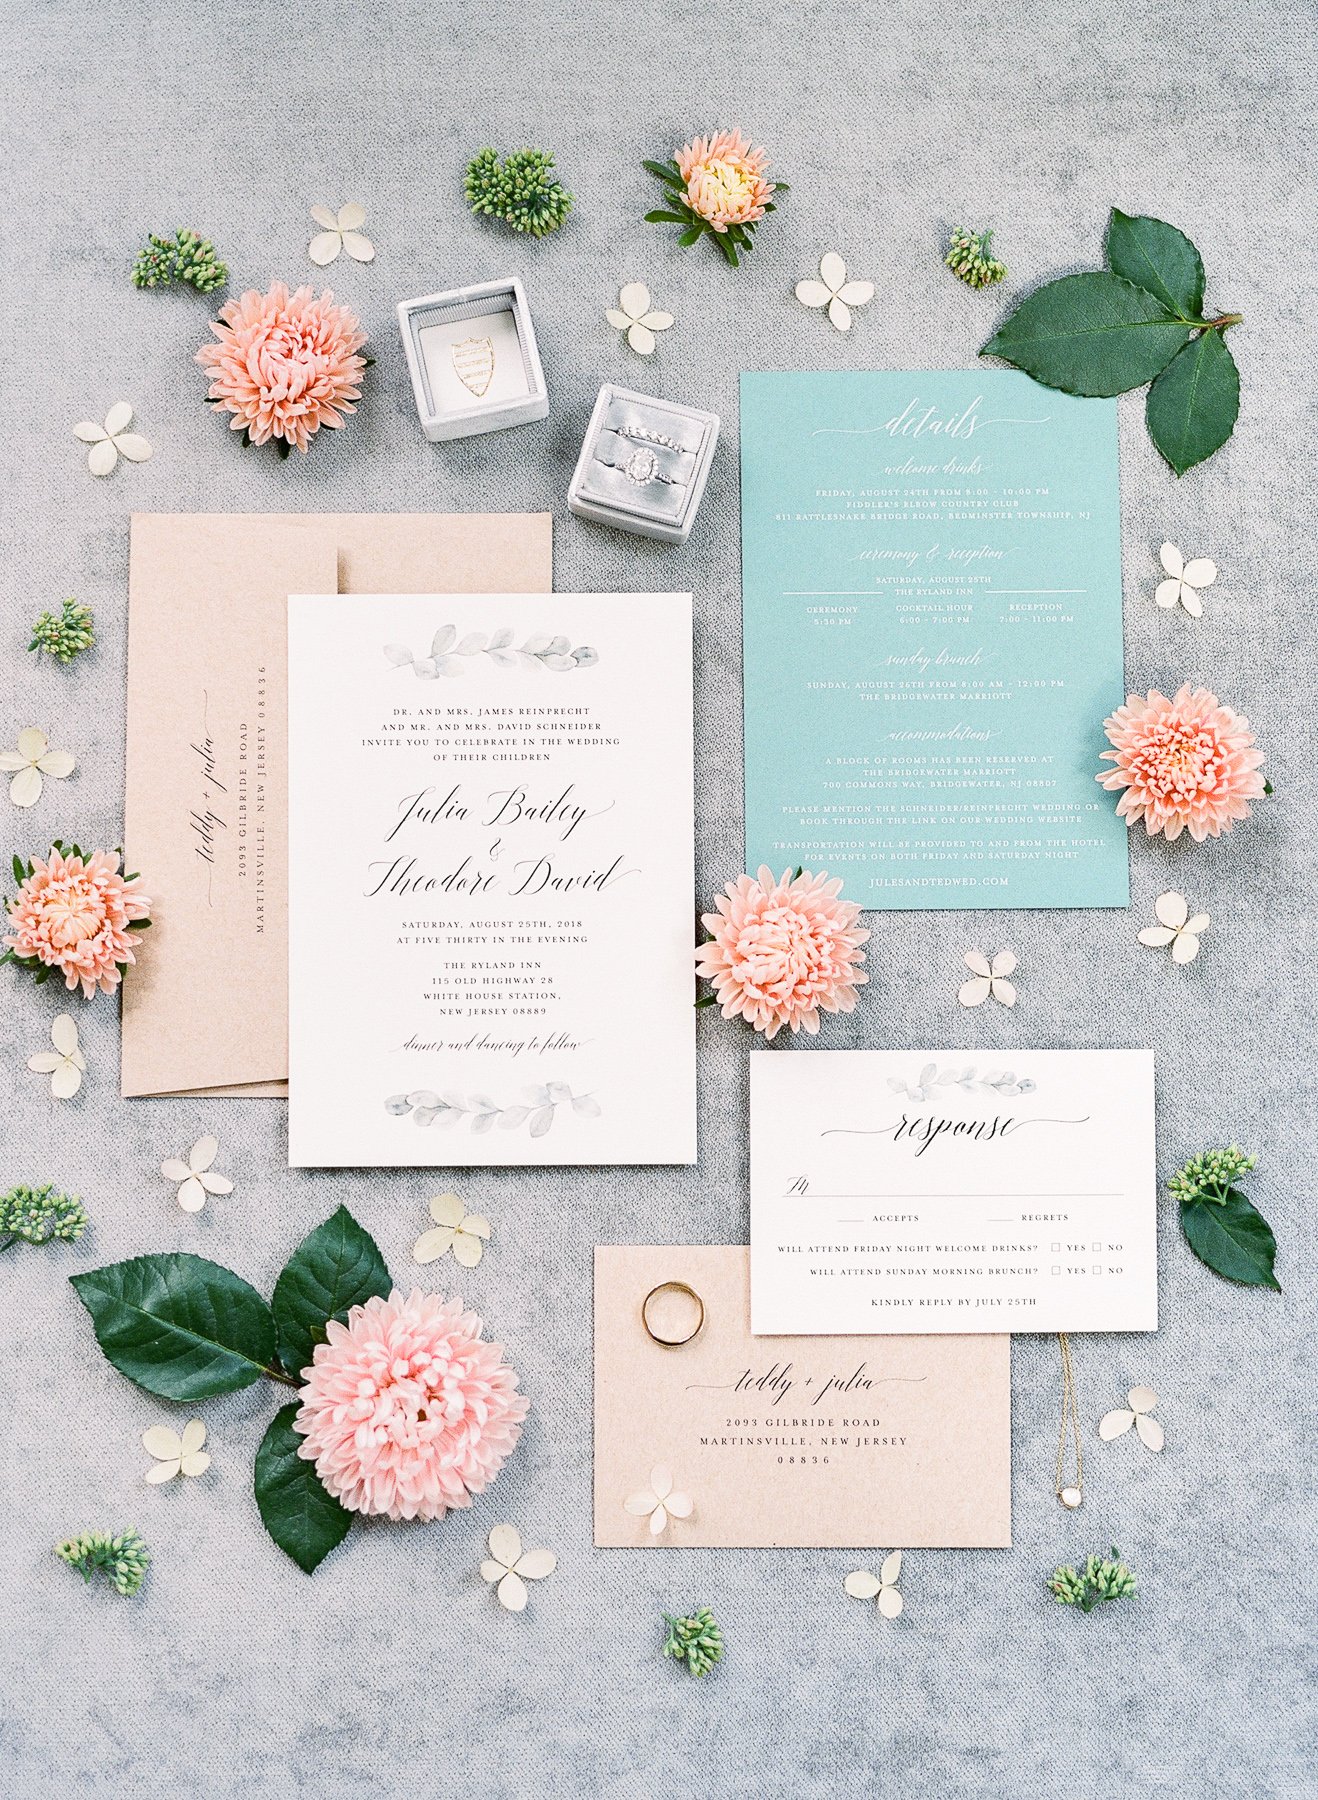 Blue Invitation Suite on Locust Collection Styling Board